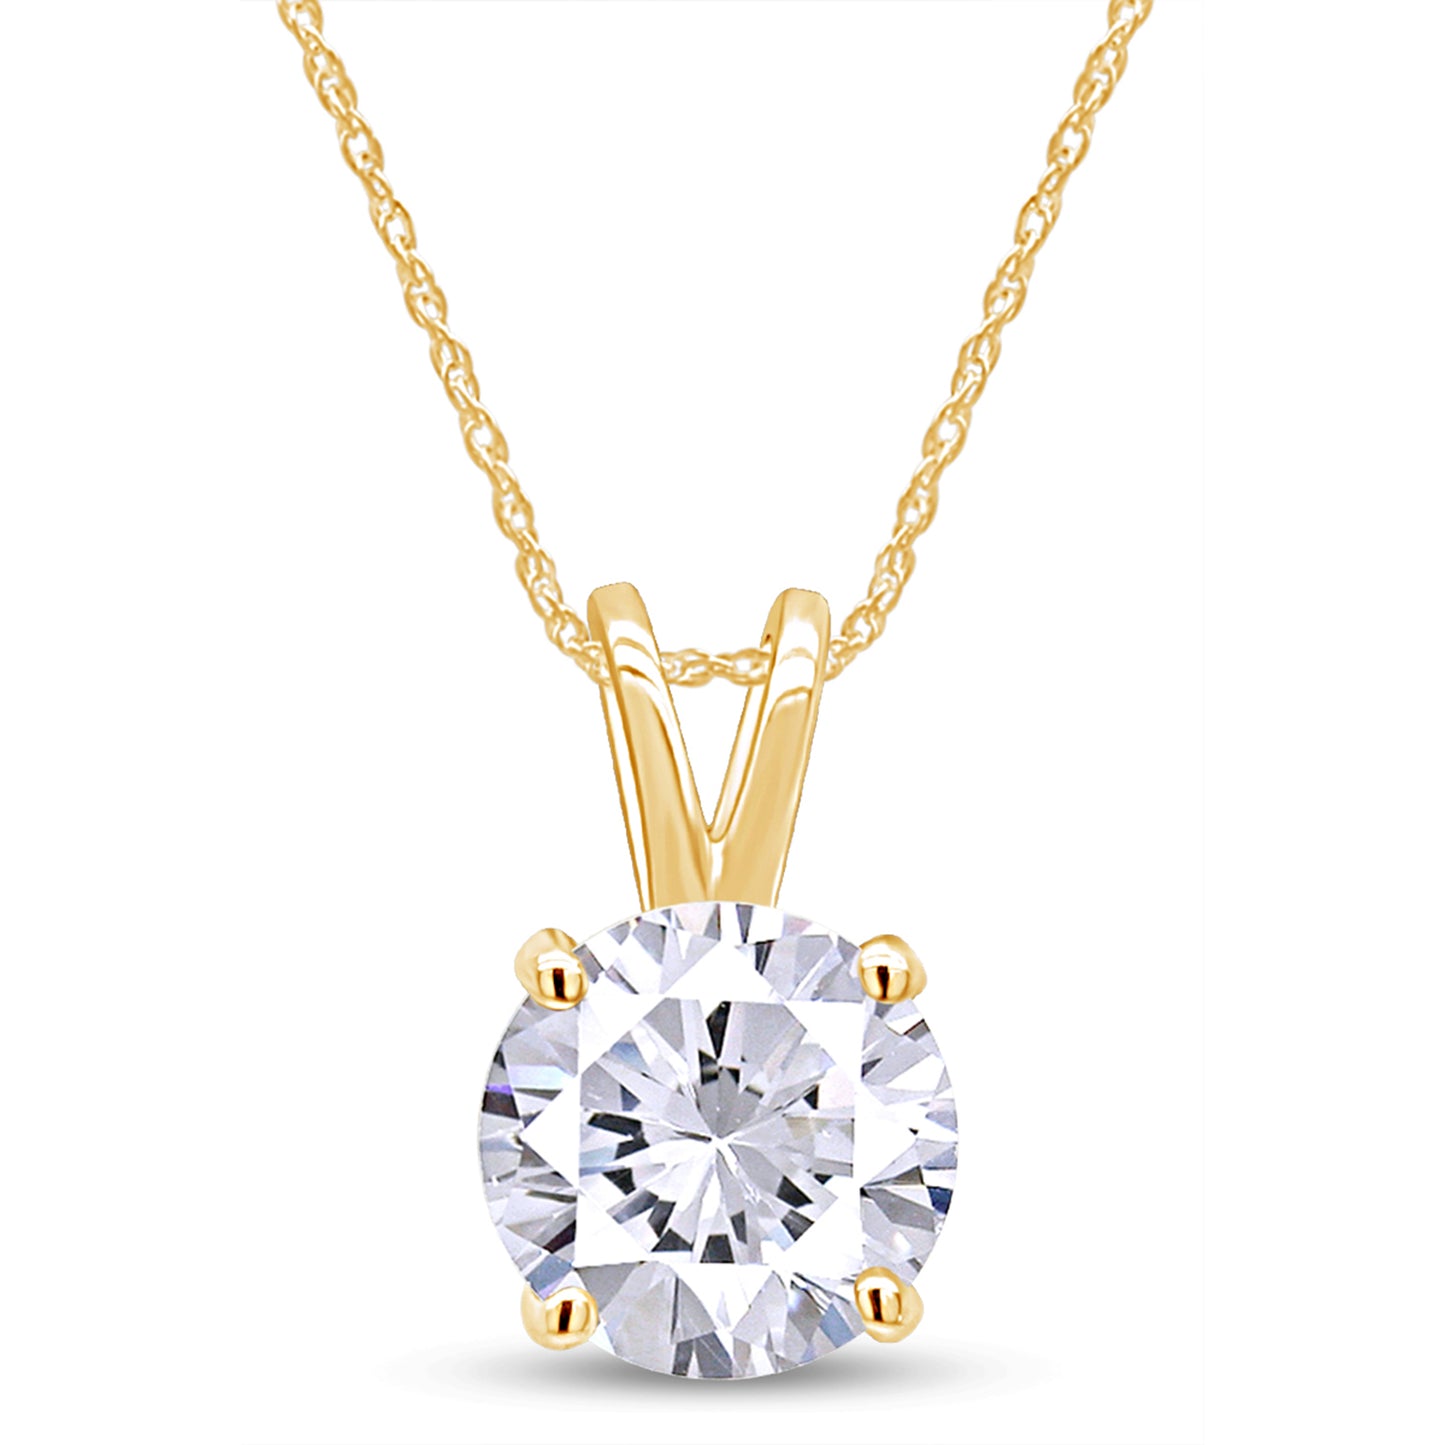 1 Carat 6.5MM Round Cut Lab Created Moissanite Diamond Solitaire Pendant Necklace In 925 Sterling Silver (1 Cttw)